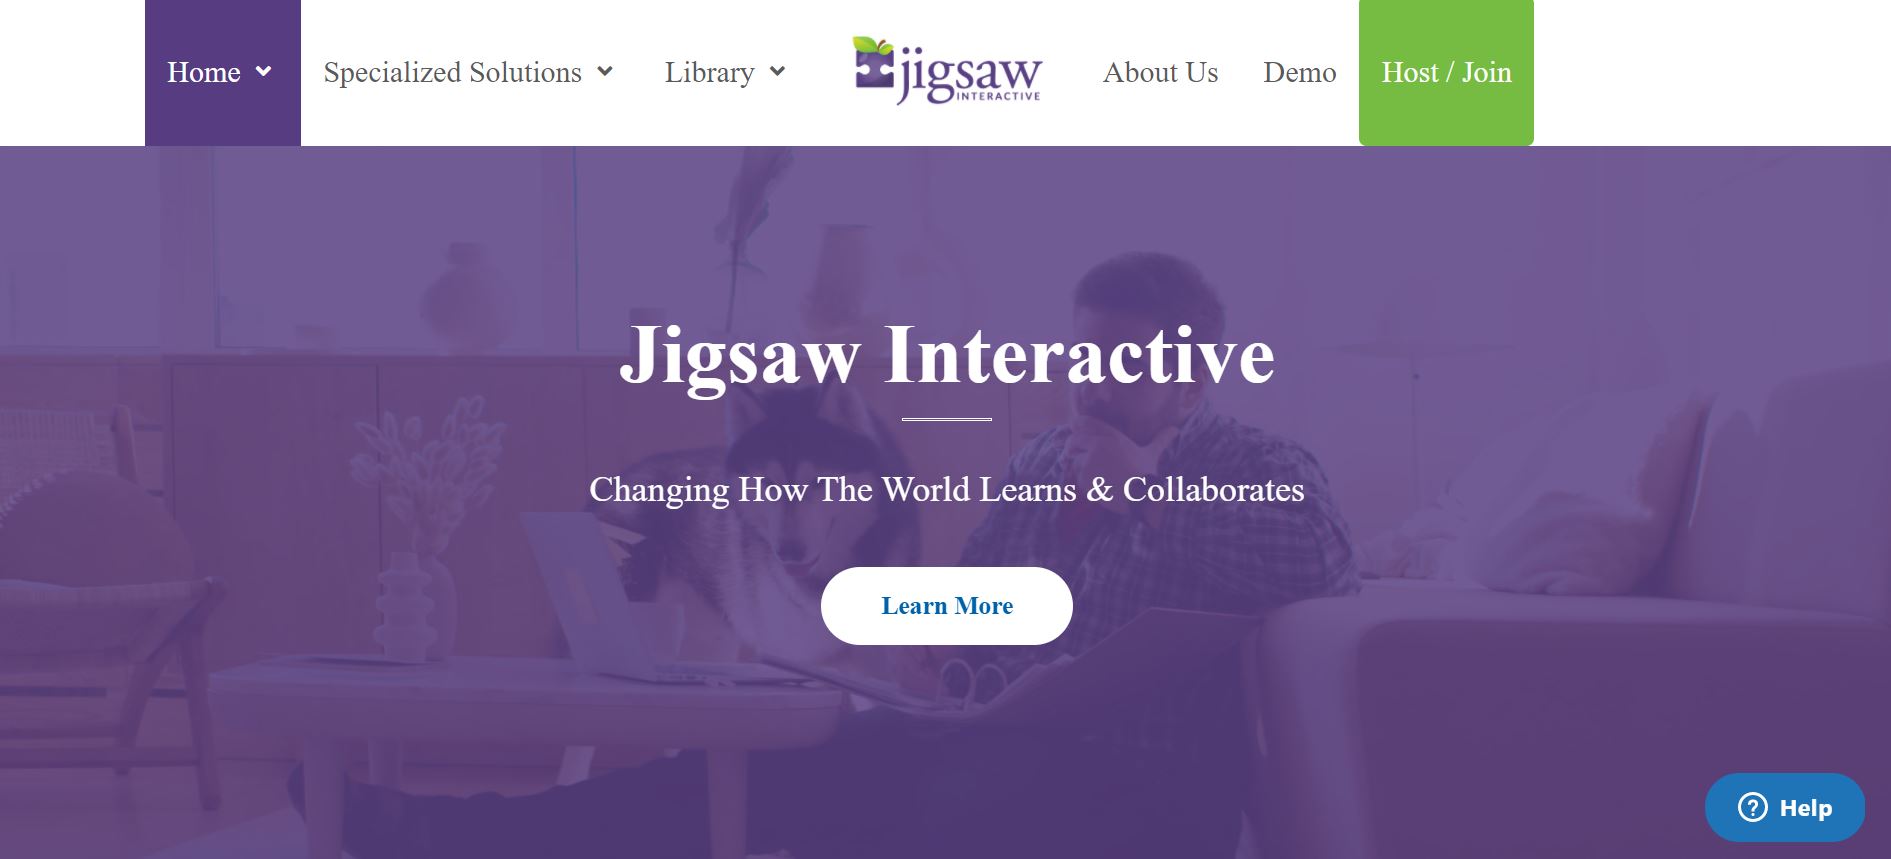 Find detailed information about Jigsaw Interactive